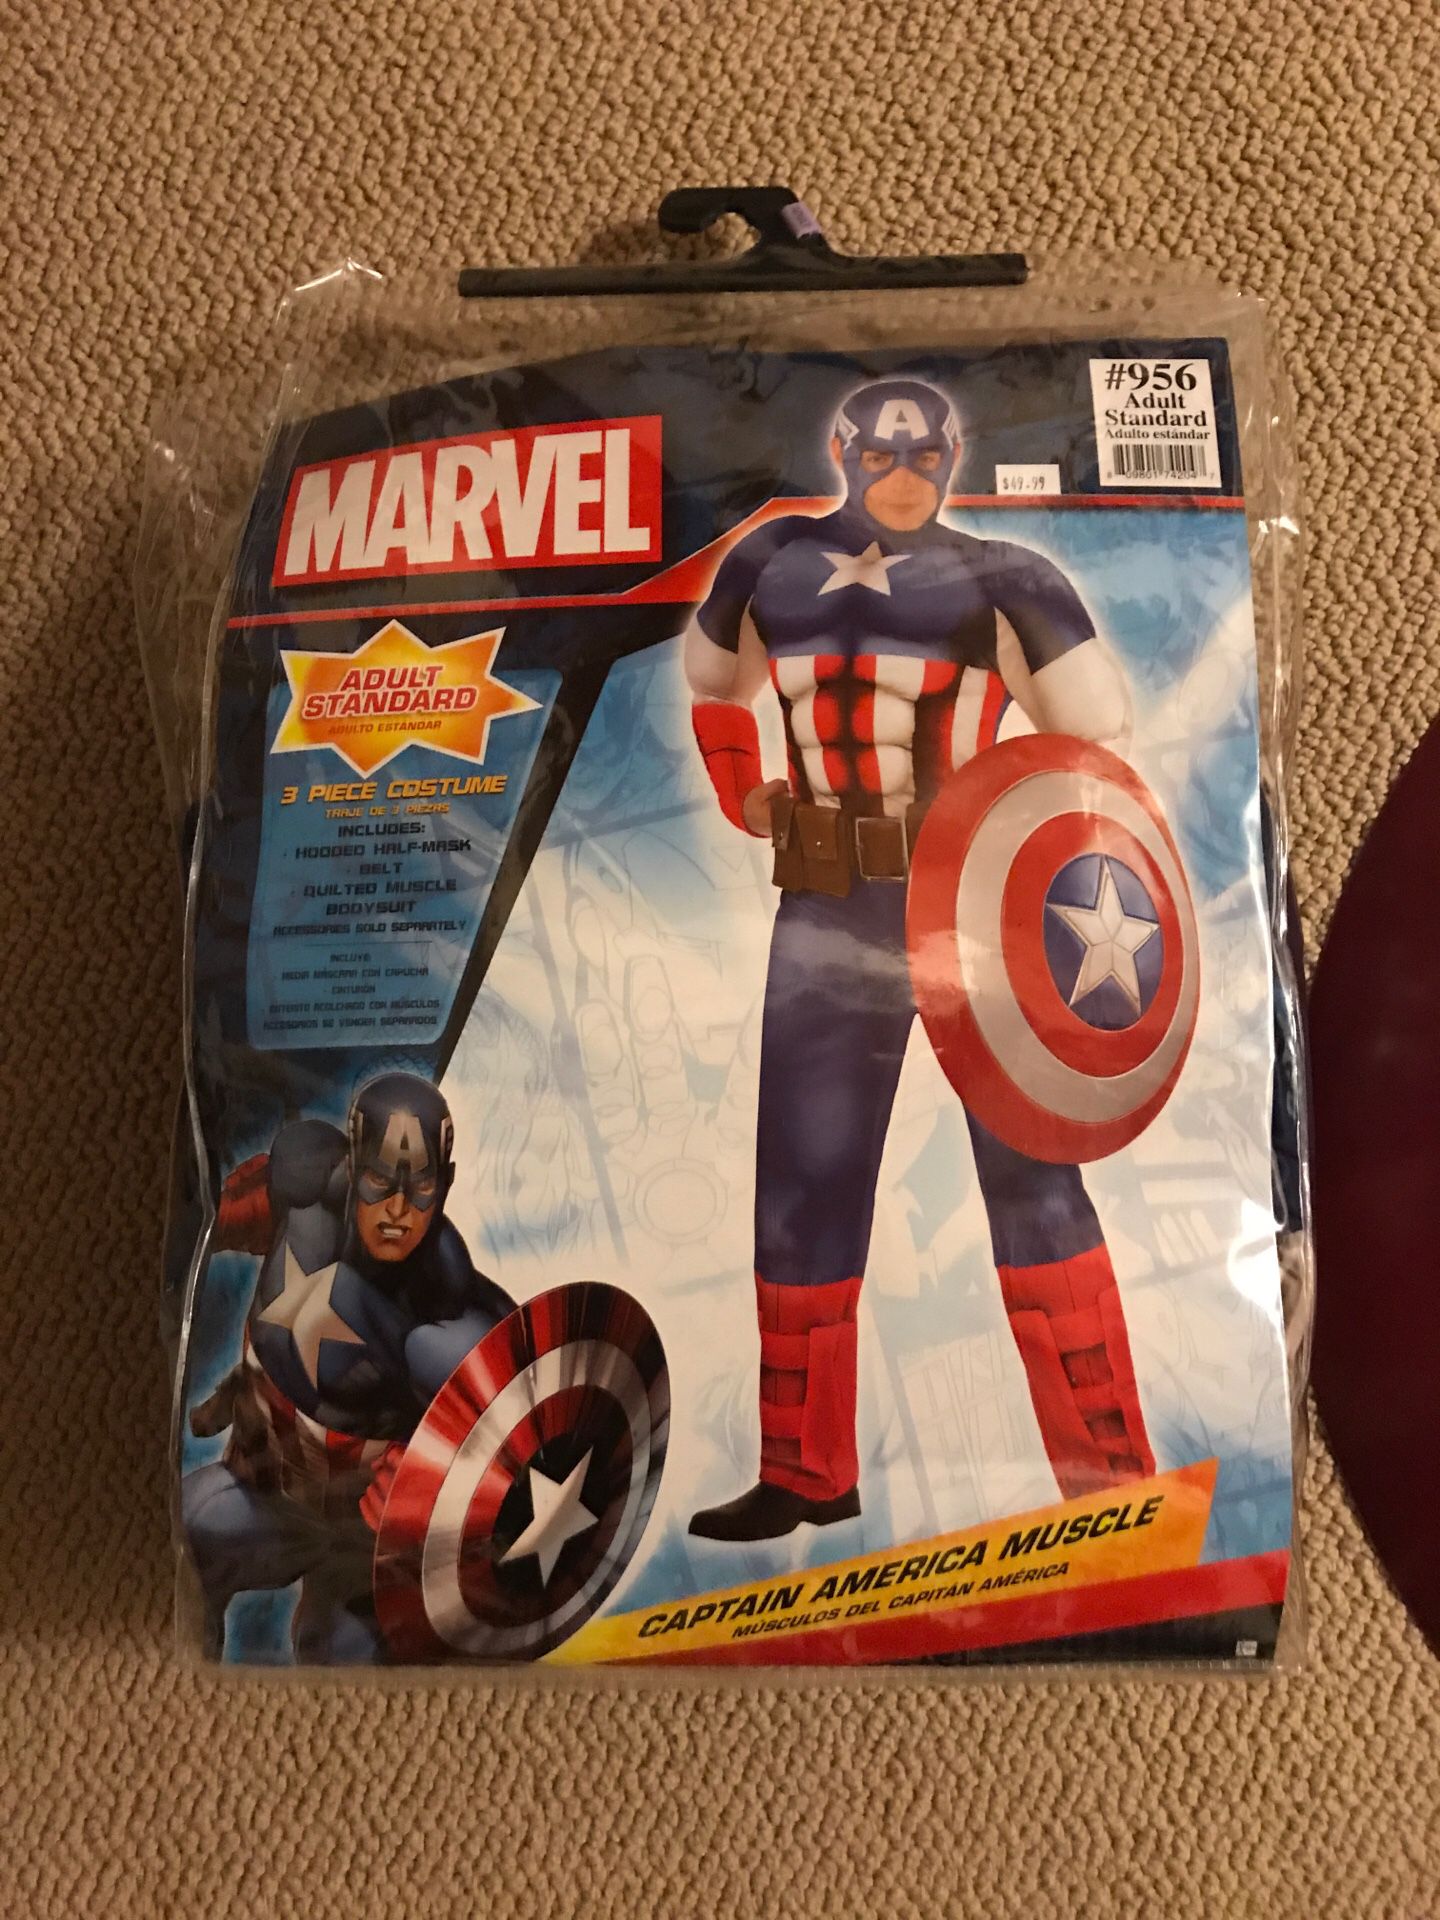 Captain america adult costume and full size shield (marvel)